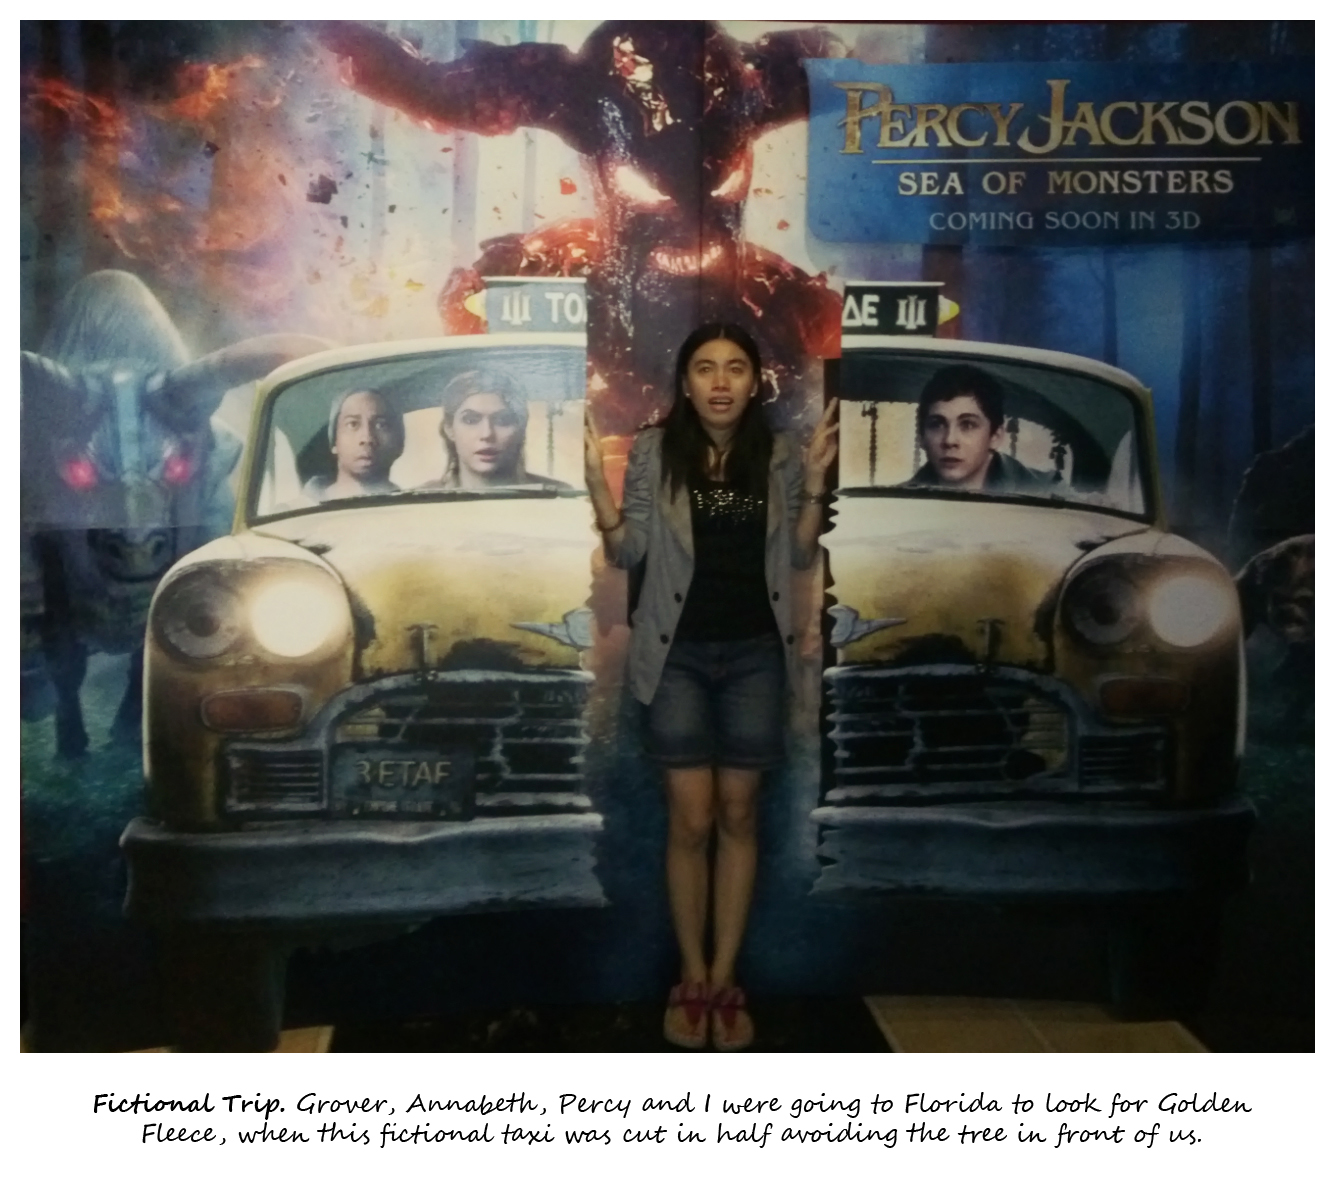 Percy Jackson: The Sea of Monsters